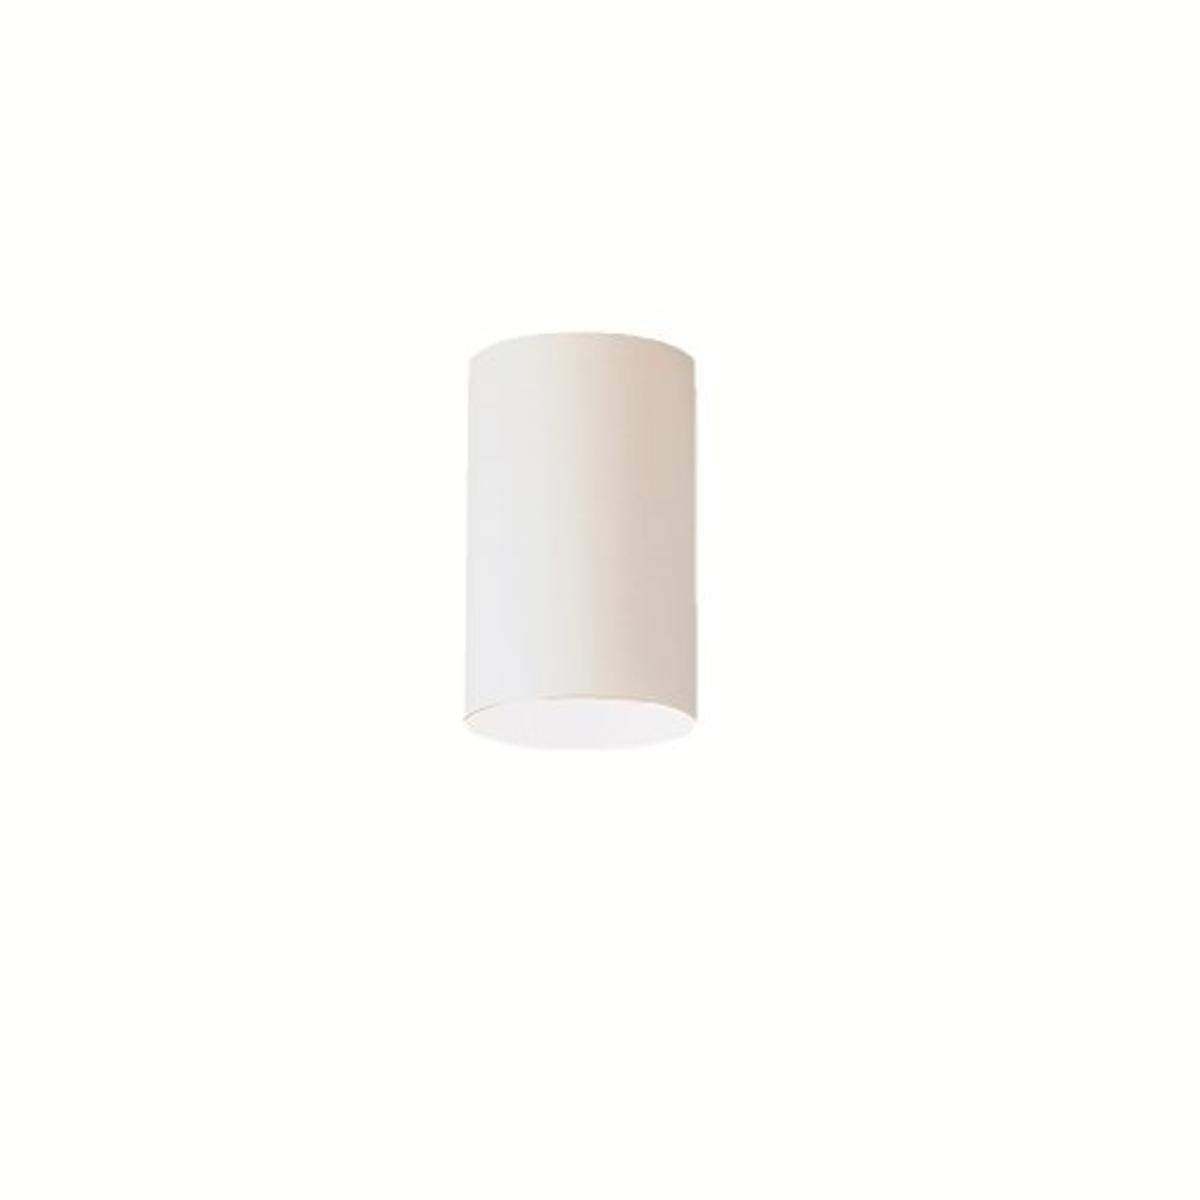 Kichler 8" Outdoor Wall Light in White, 1-Light Exterior Wall Sconce Porch Light, (8" H x 4.5" W), 9834WH